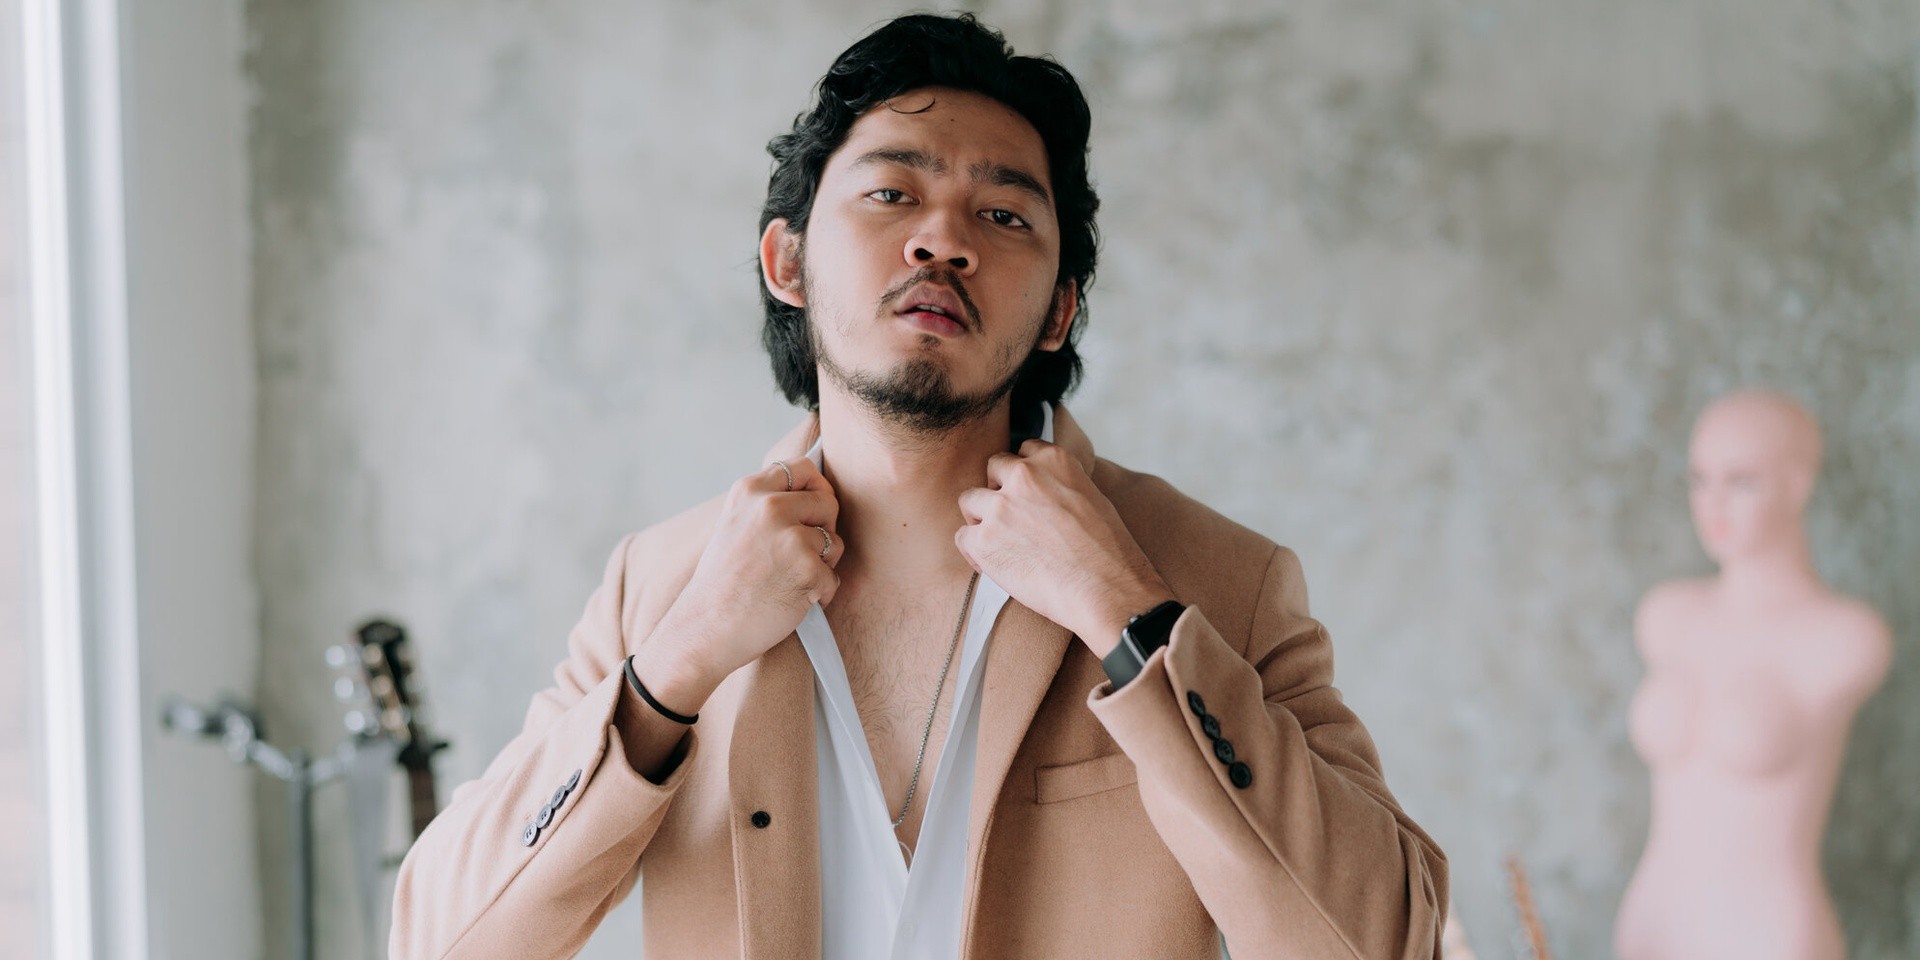 Pamungkas on his upcoming album 'SOLIPSISM 0.2': "You will find new music and a new perspective"